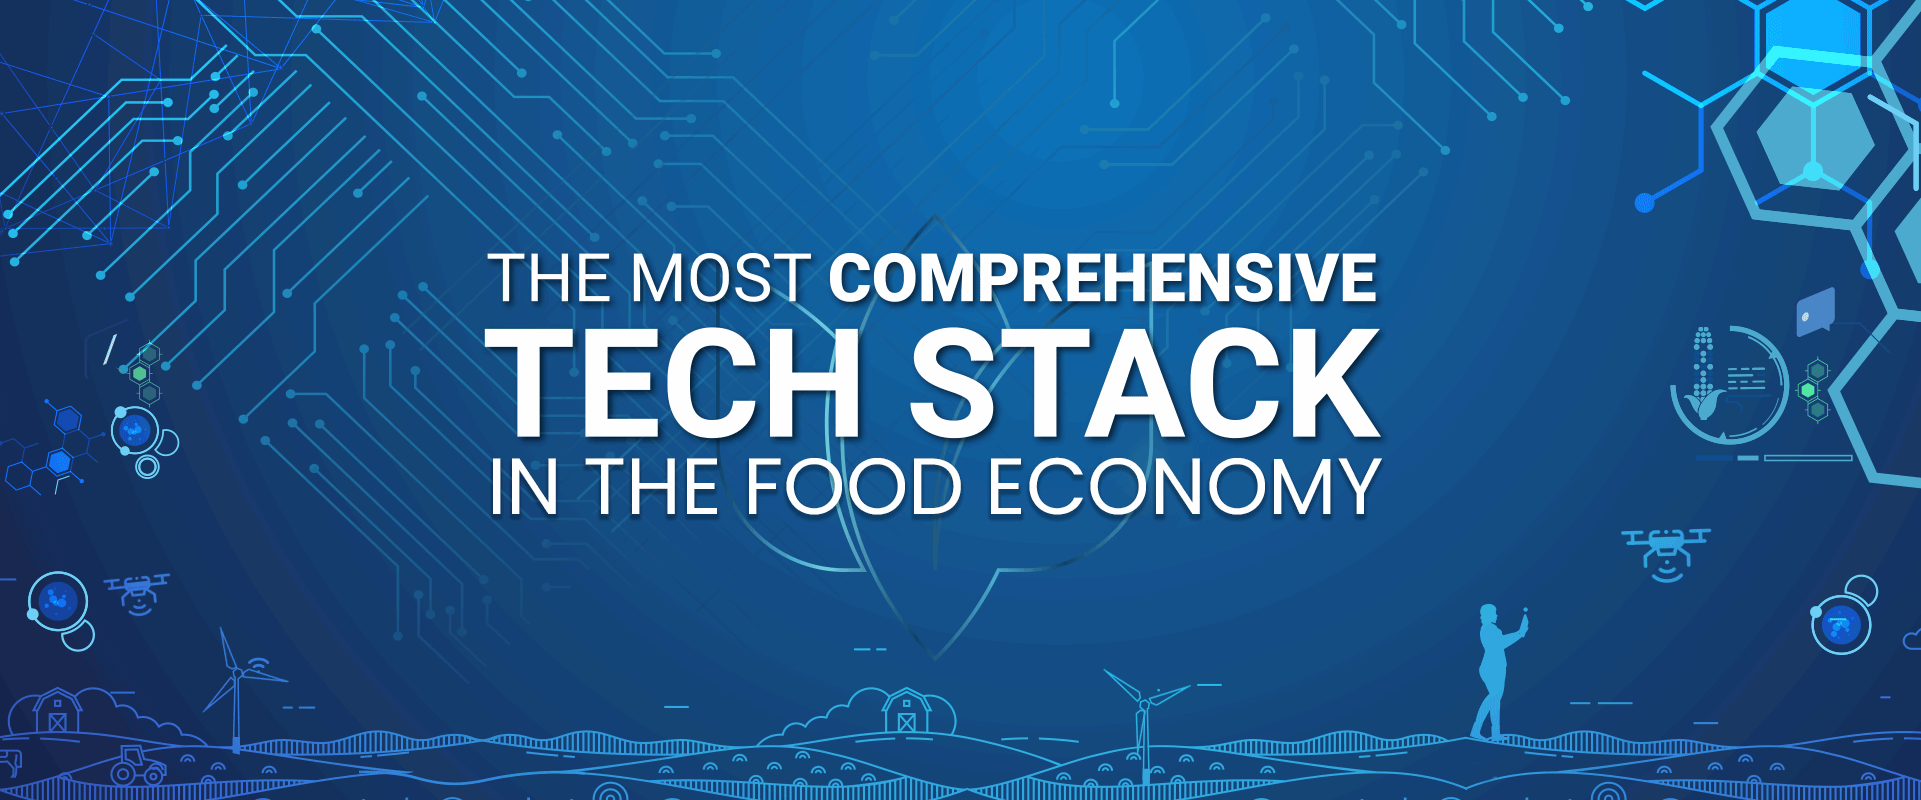 The Most Comprehensive Tech Stack in the Food Economy - WayCool